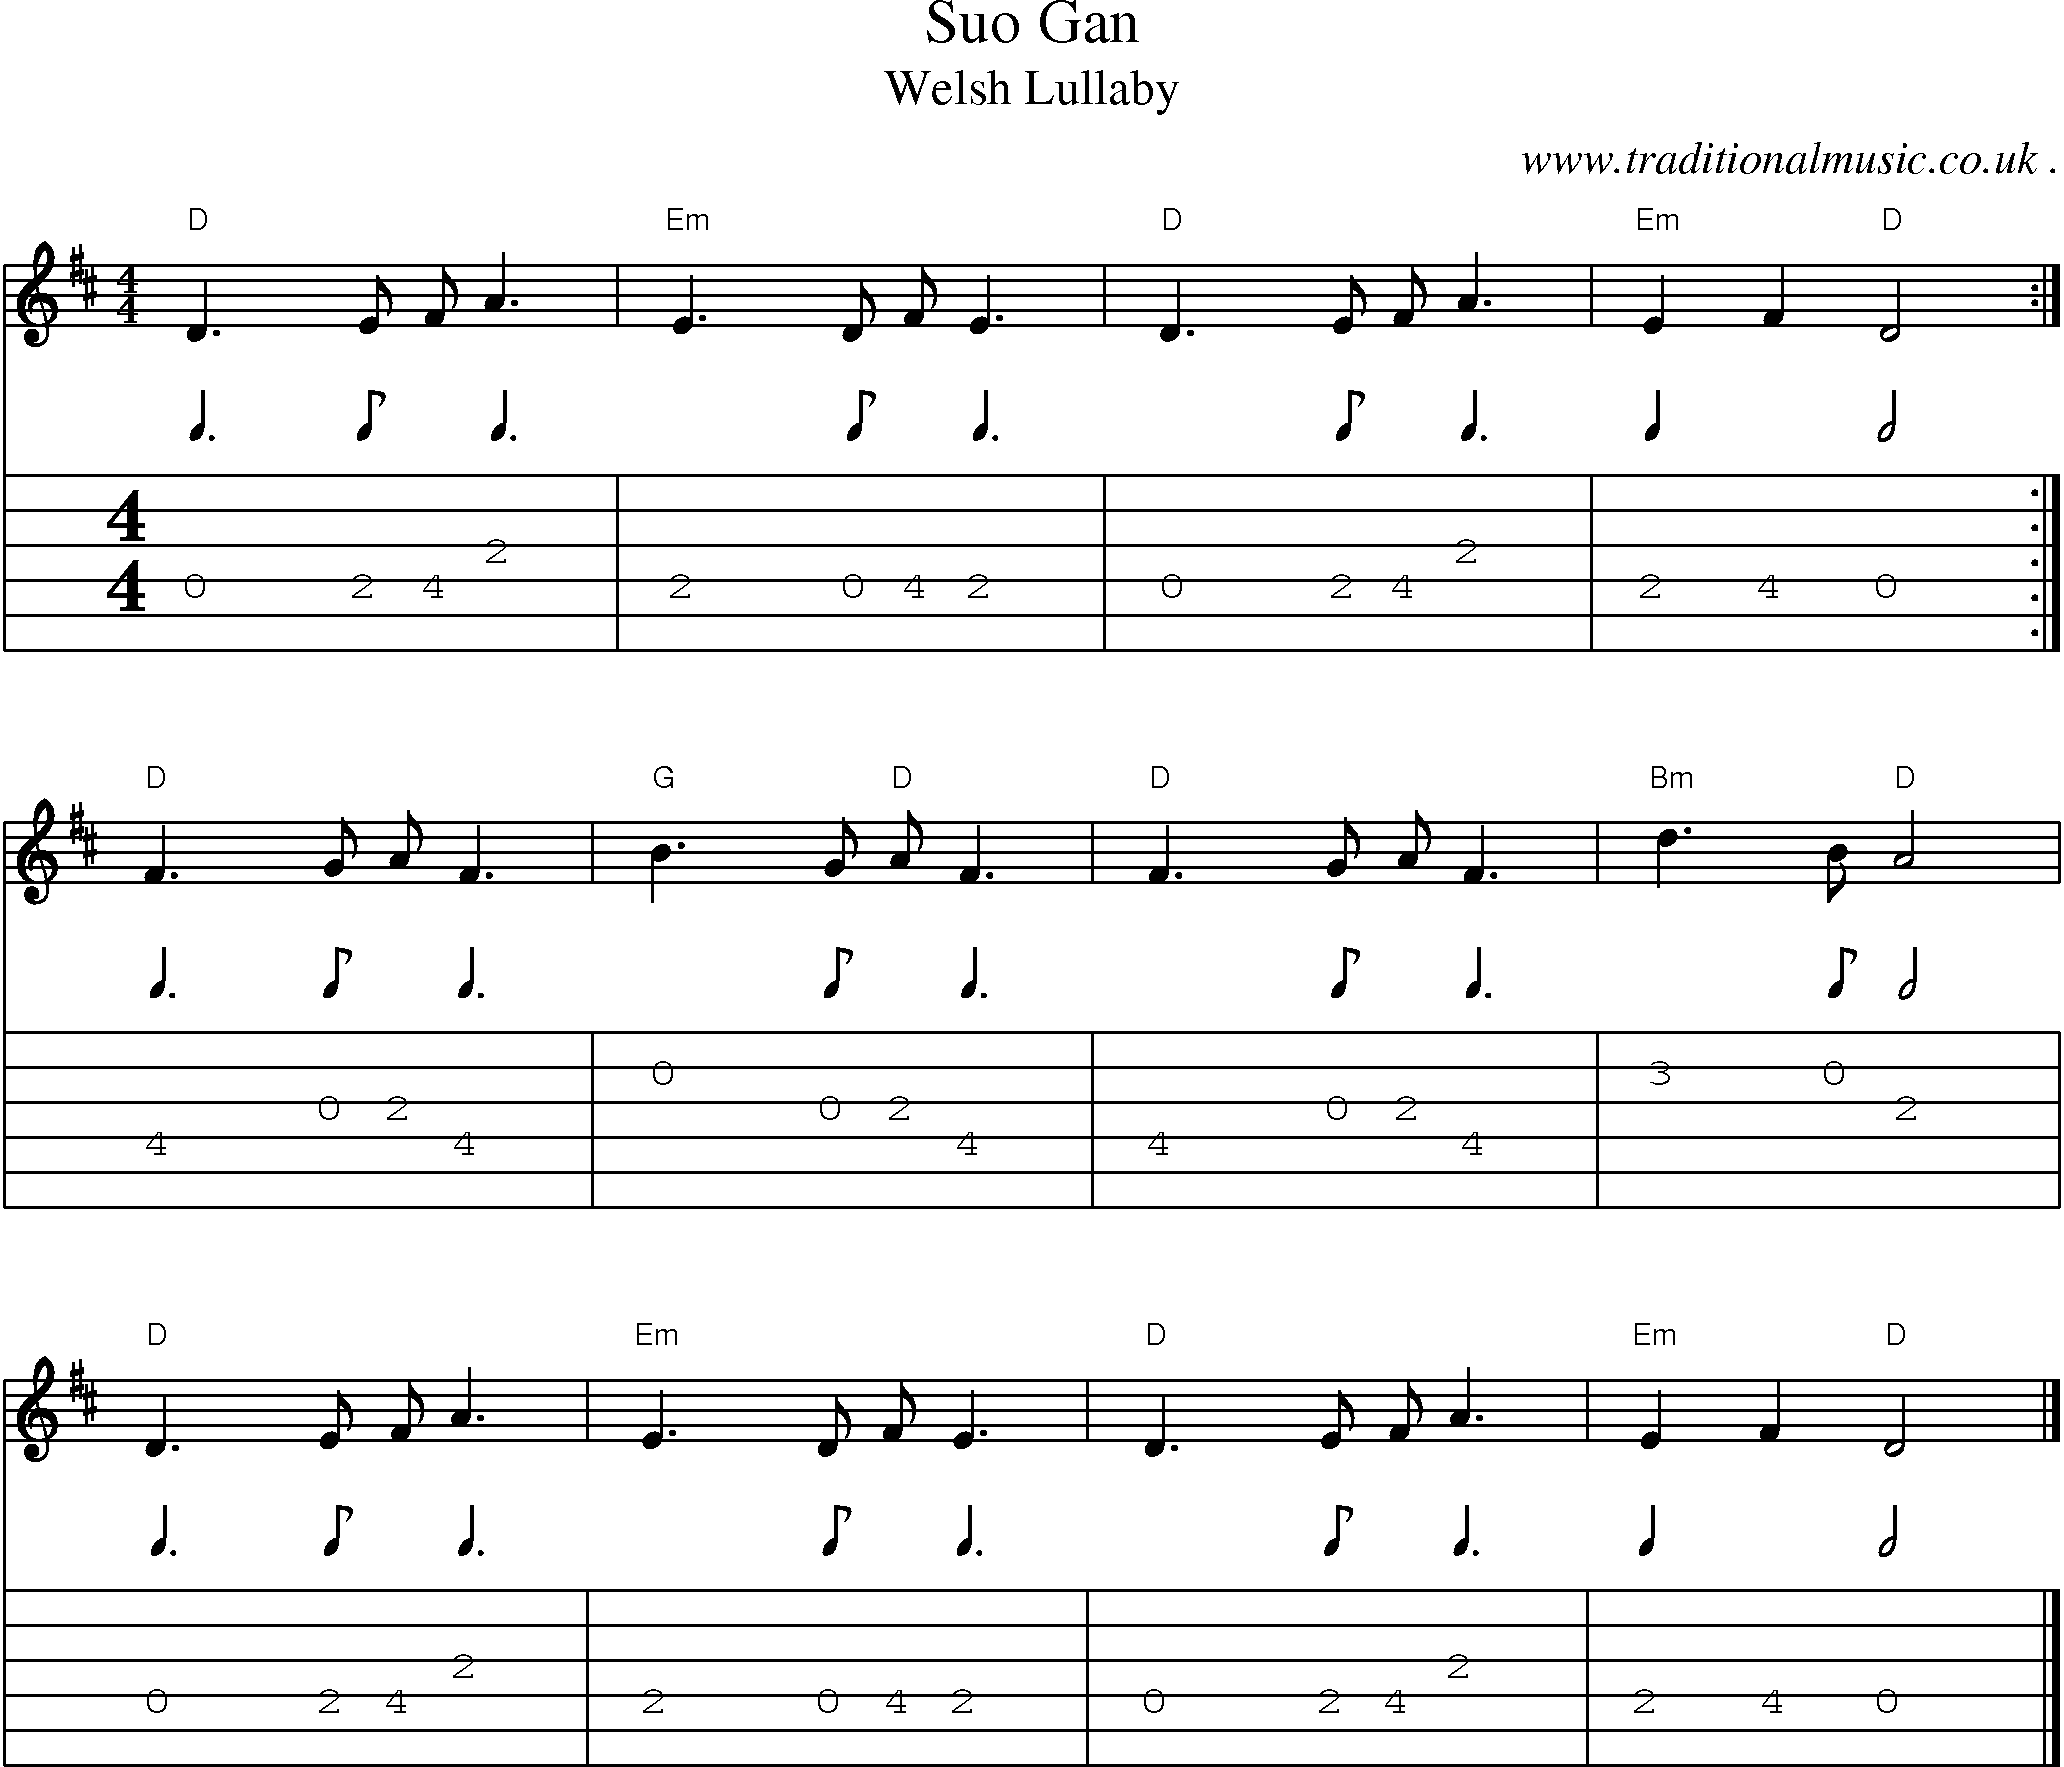 Music Score and Guitar Tabs for Suo Gan